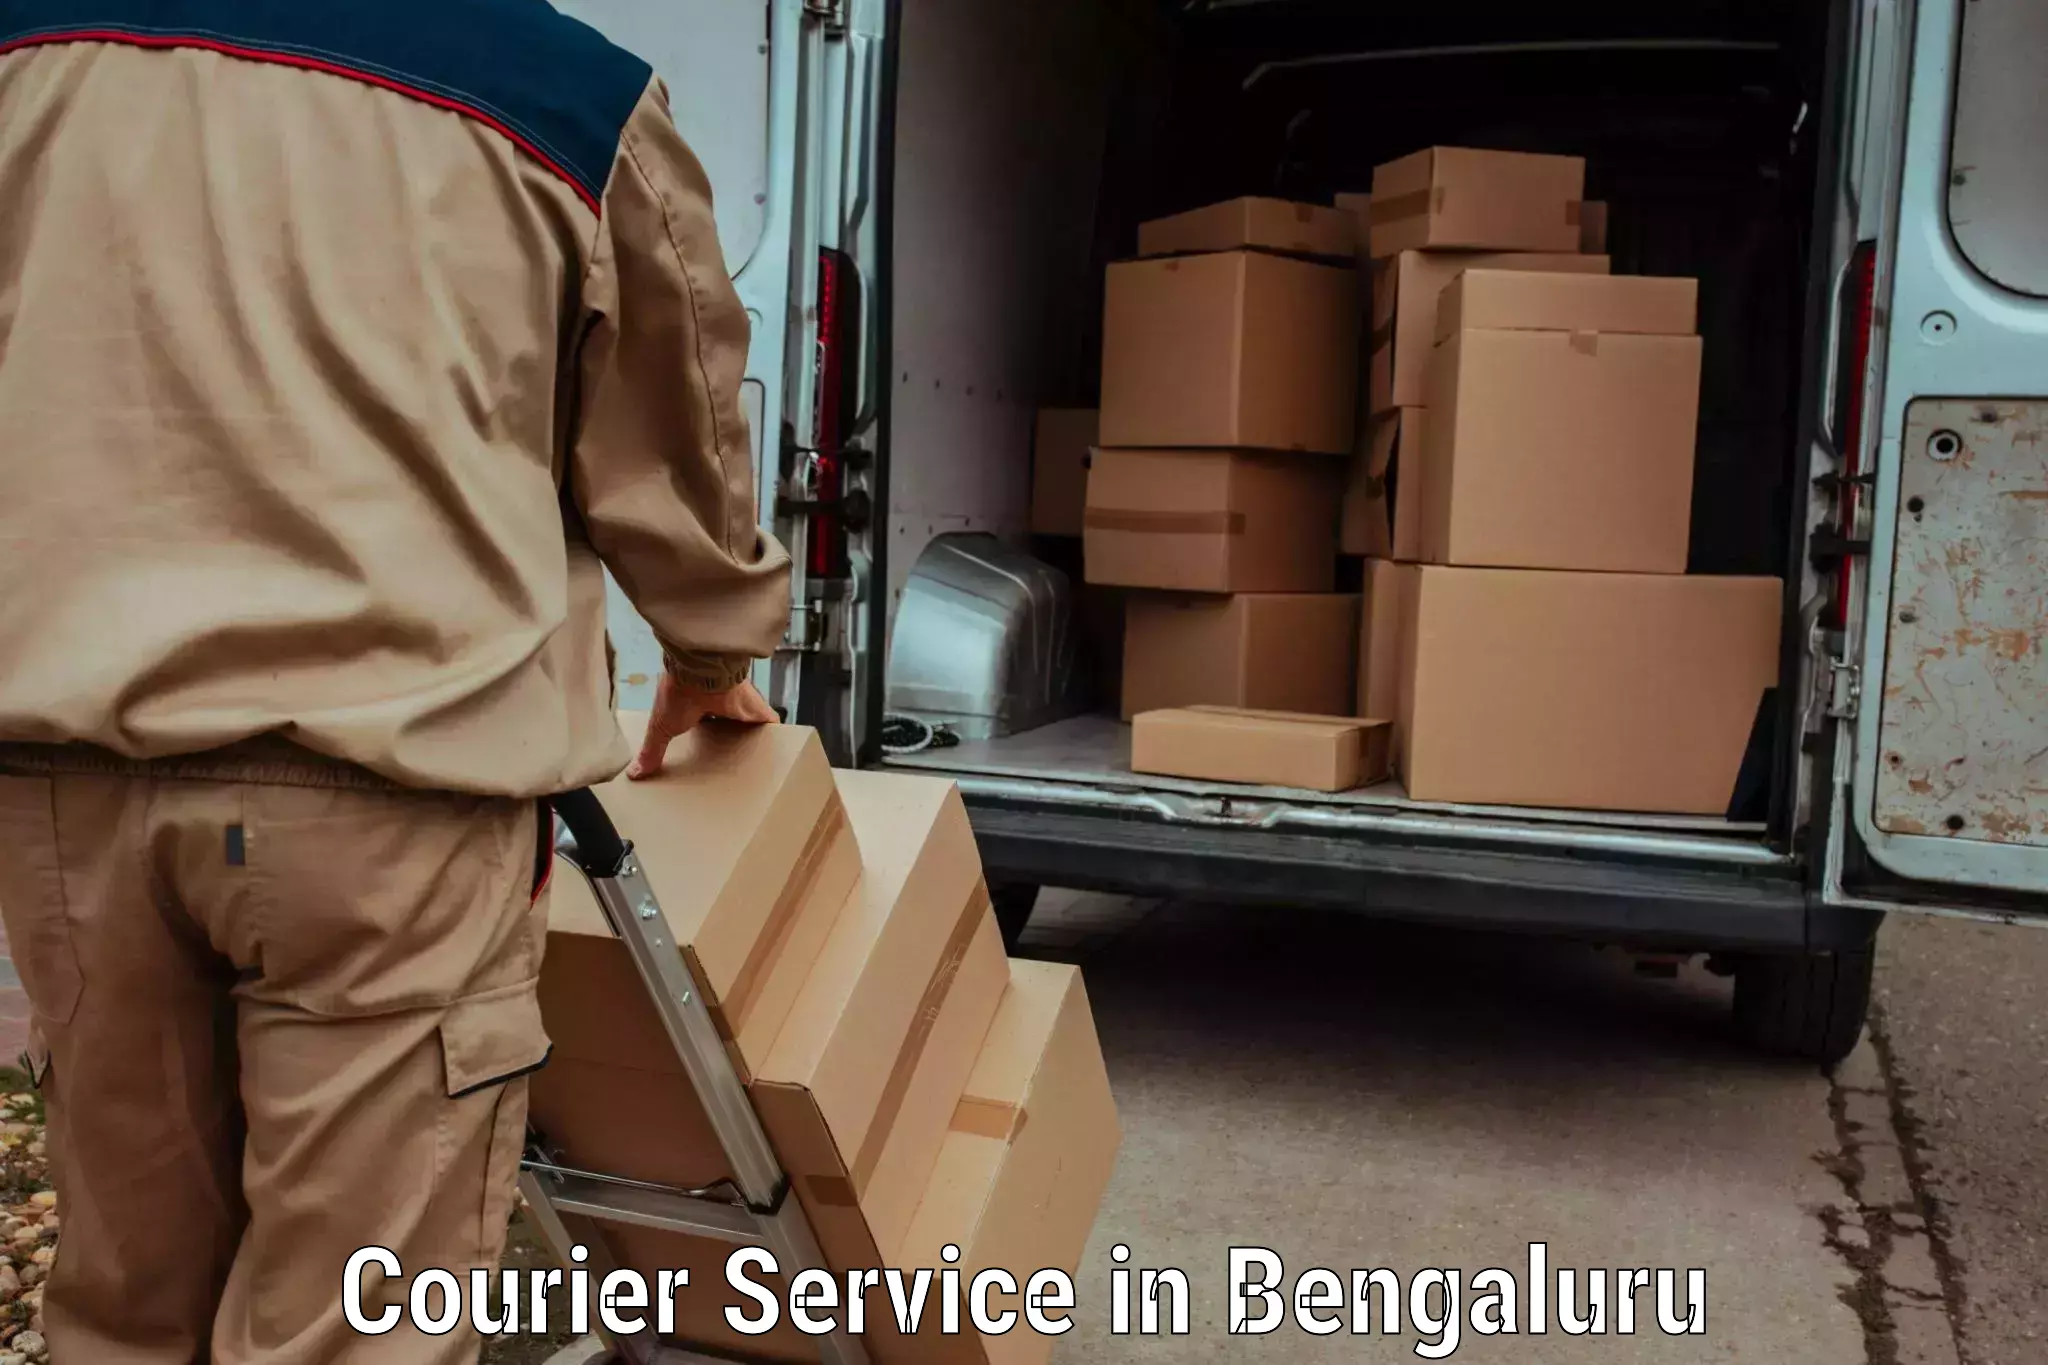 Small business couriers in Bengaluru